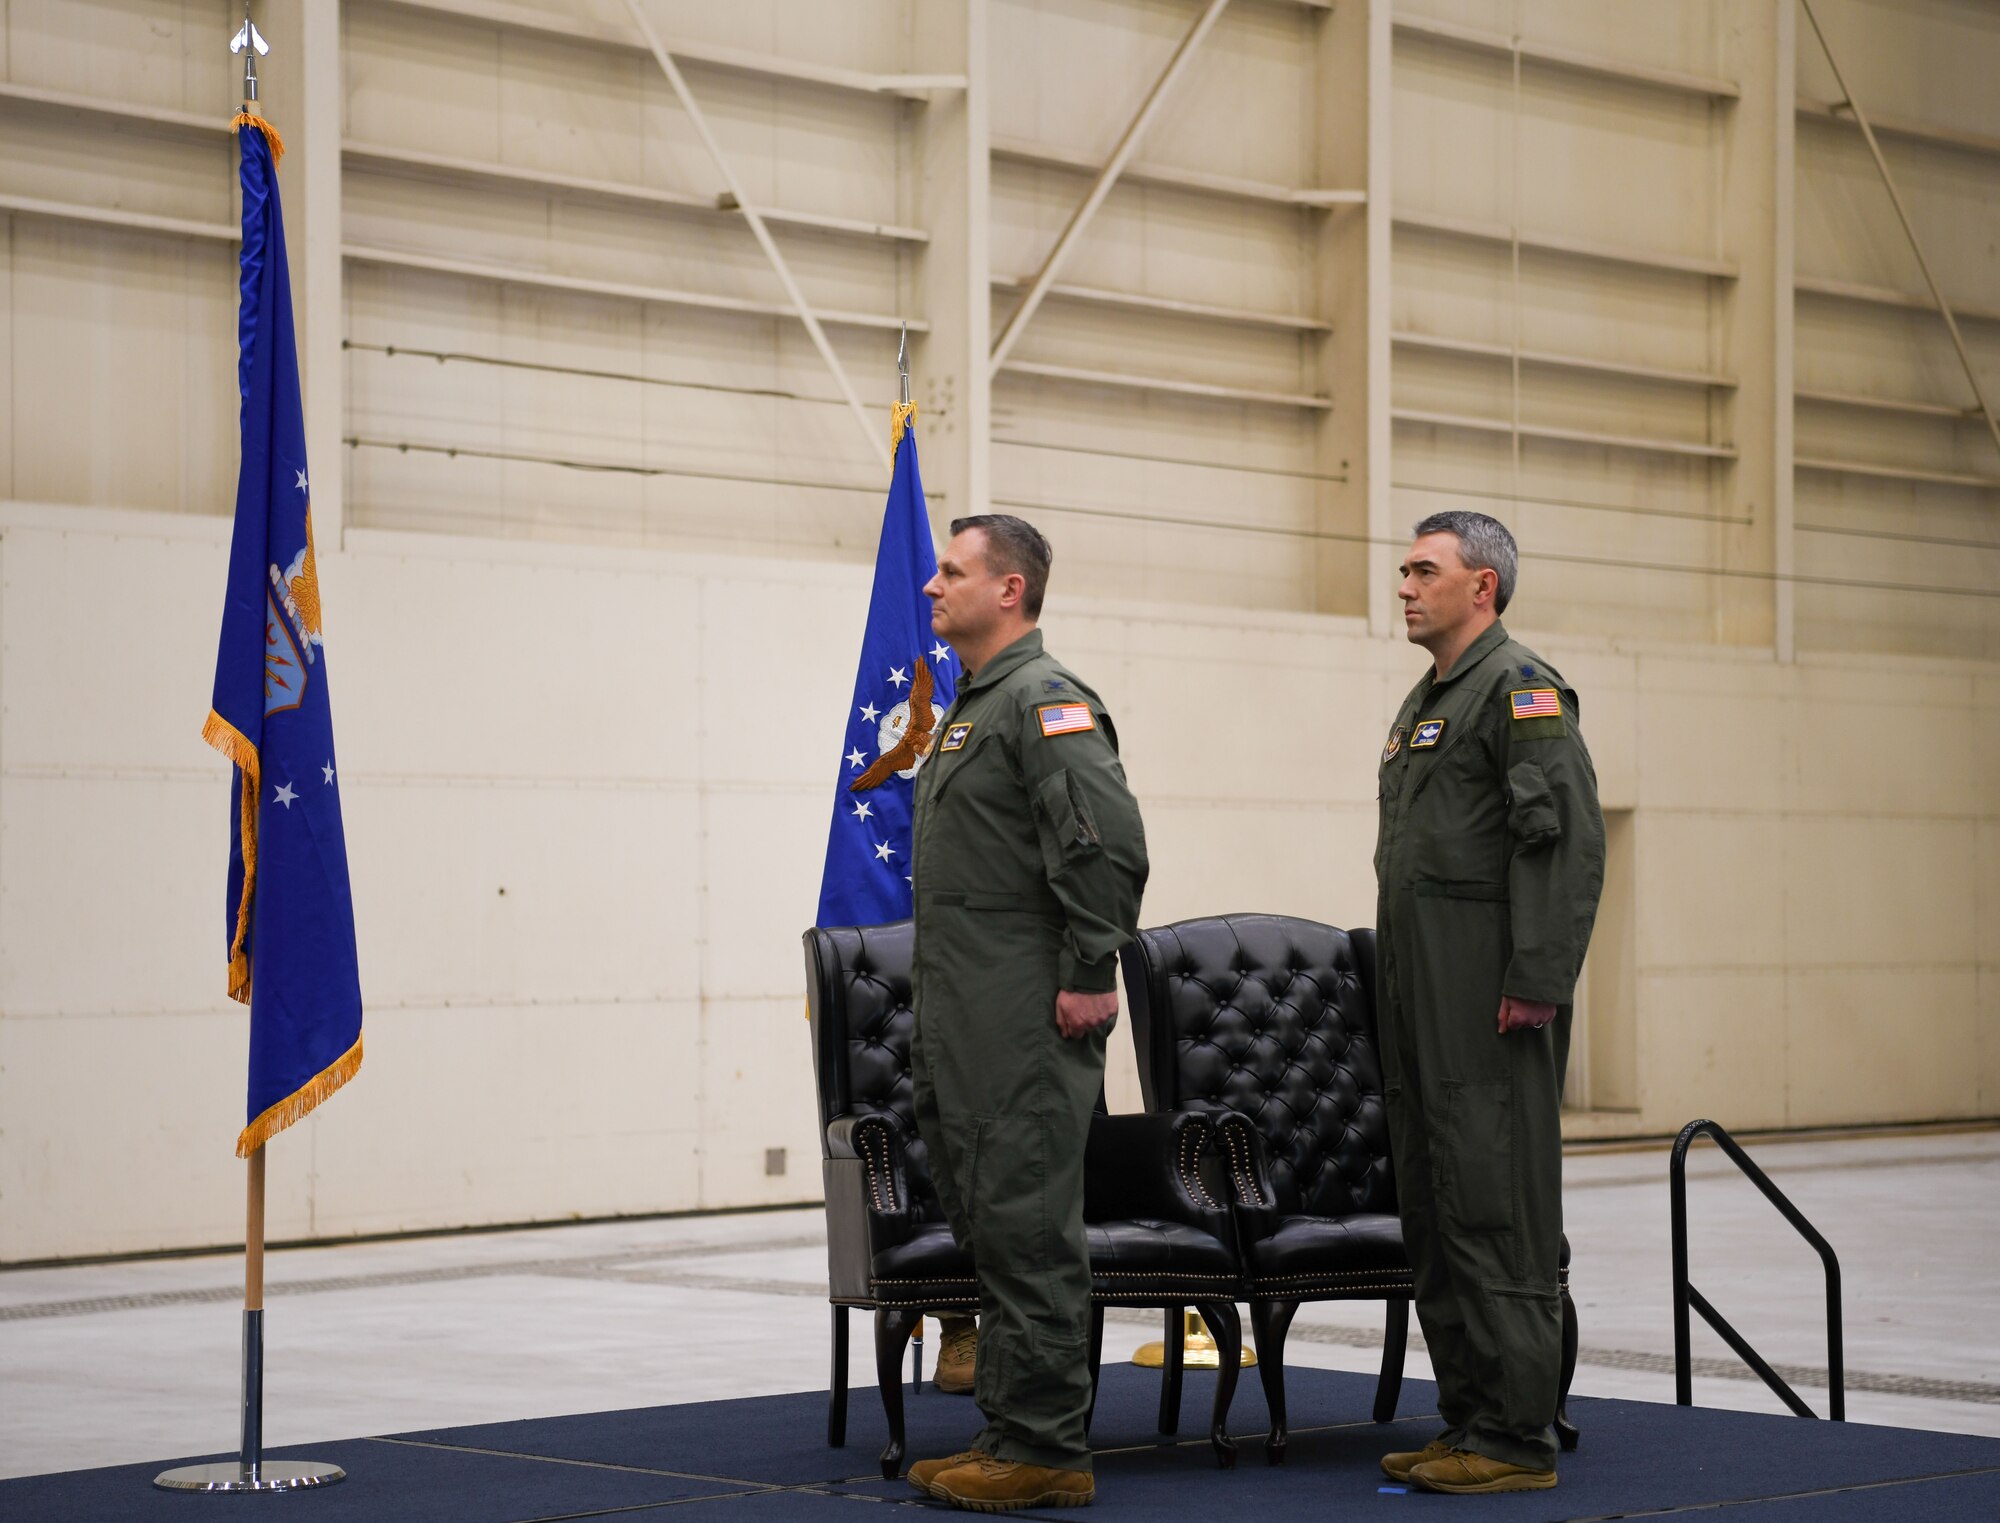 Air Reserve members, family and friends gather to celebrate as Lt. Col. Kevin Snow assumes command of the 349th Operations Group during a ceremony at Travis Air Forces Base, California, January 07, 2023.